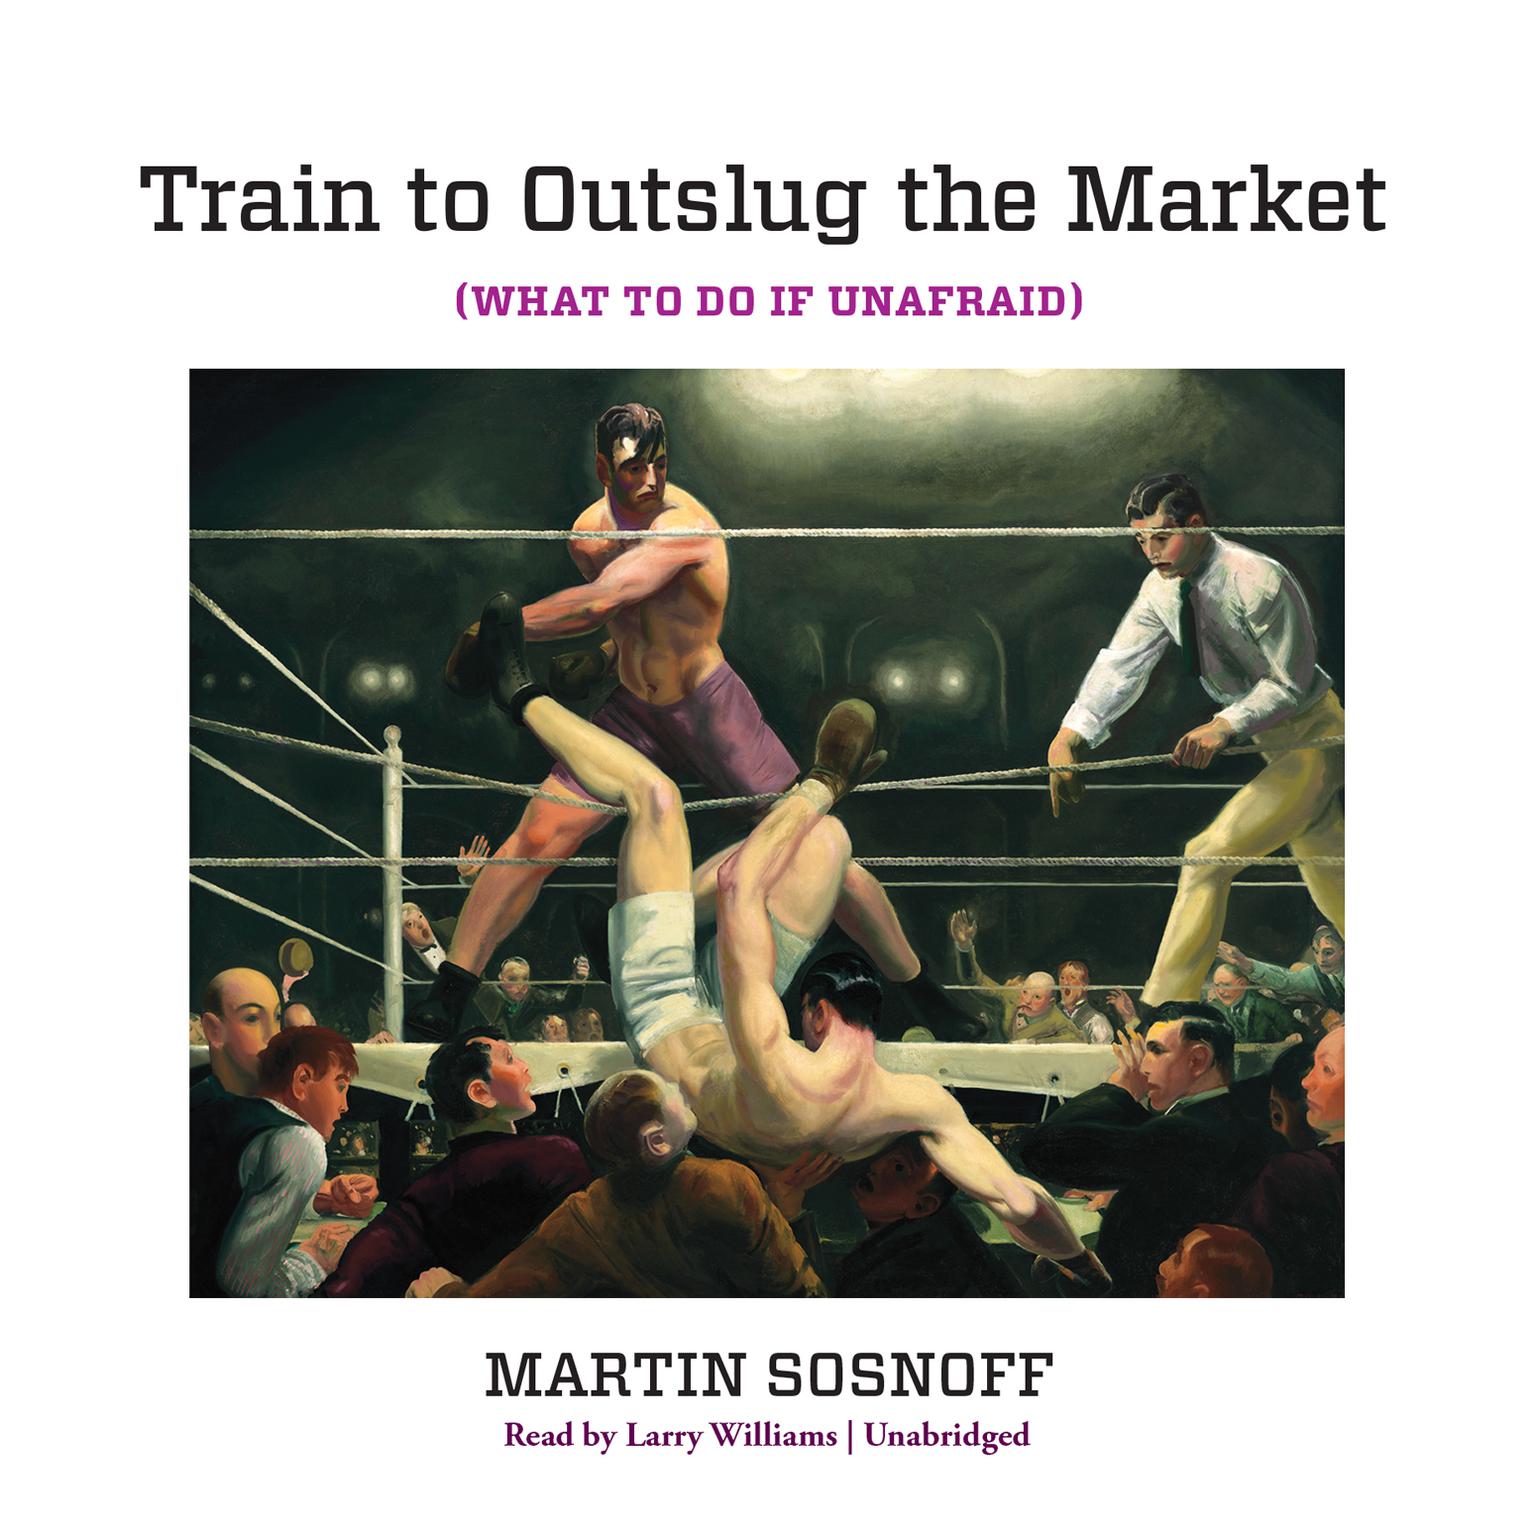 Train To Outslug The Market: WHAT TO DO IF UNAFRAID Audiobook, by Martin Sosnoff